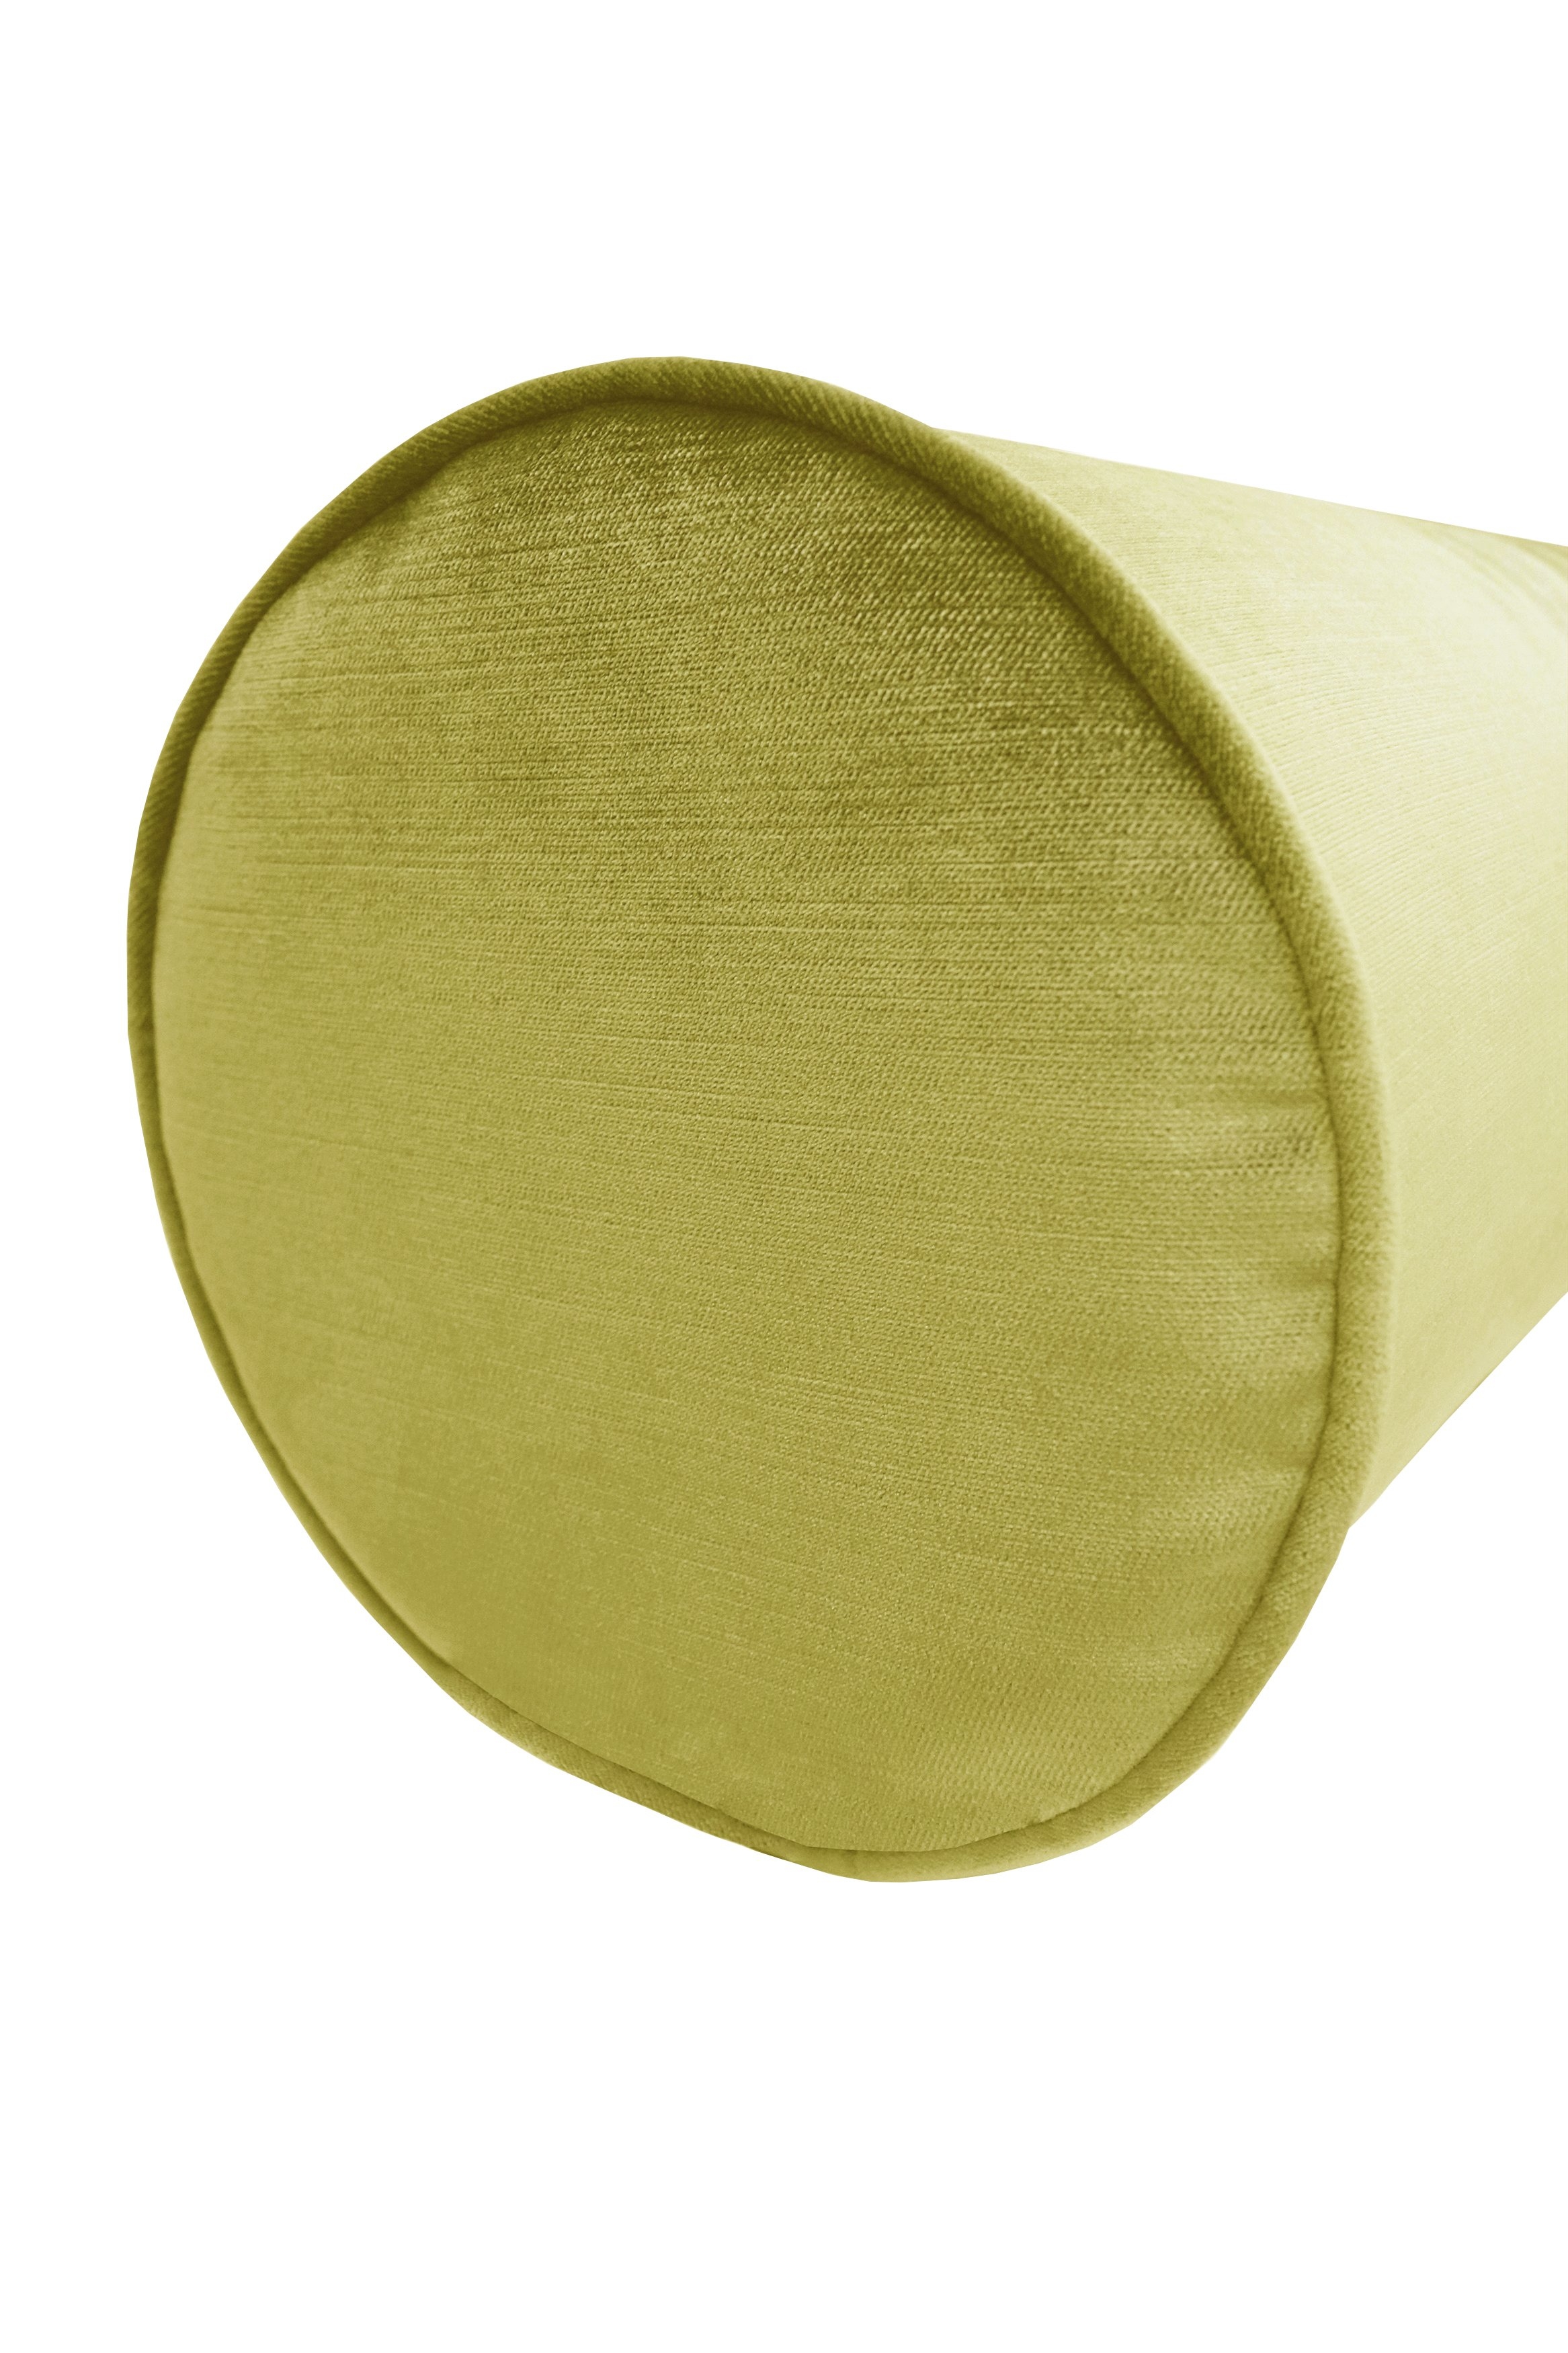 THE BOLSTER :: FAUX SILK VELVET // CHARTREUSE - TWIN // 9" X 24" - Image 2